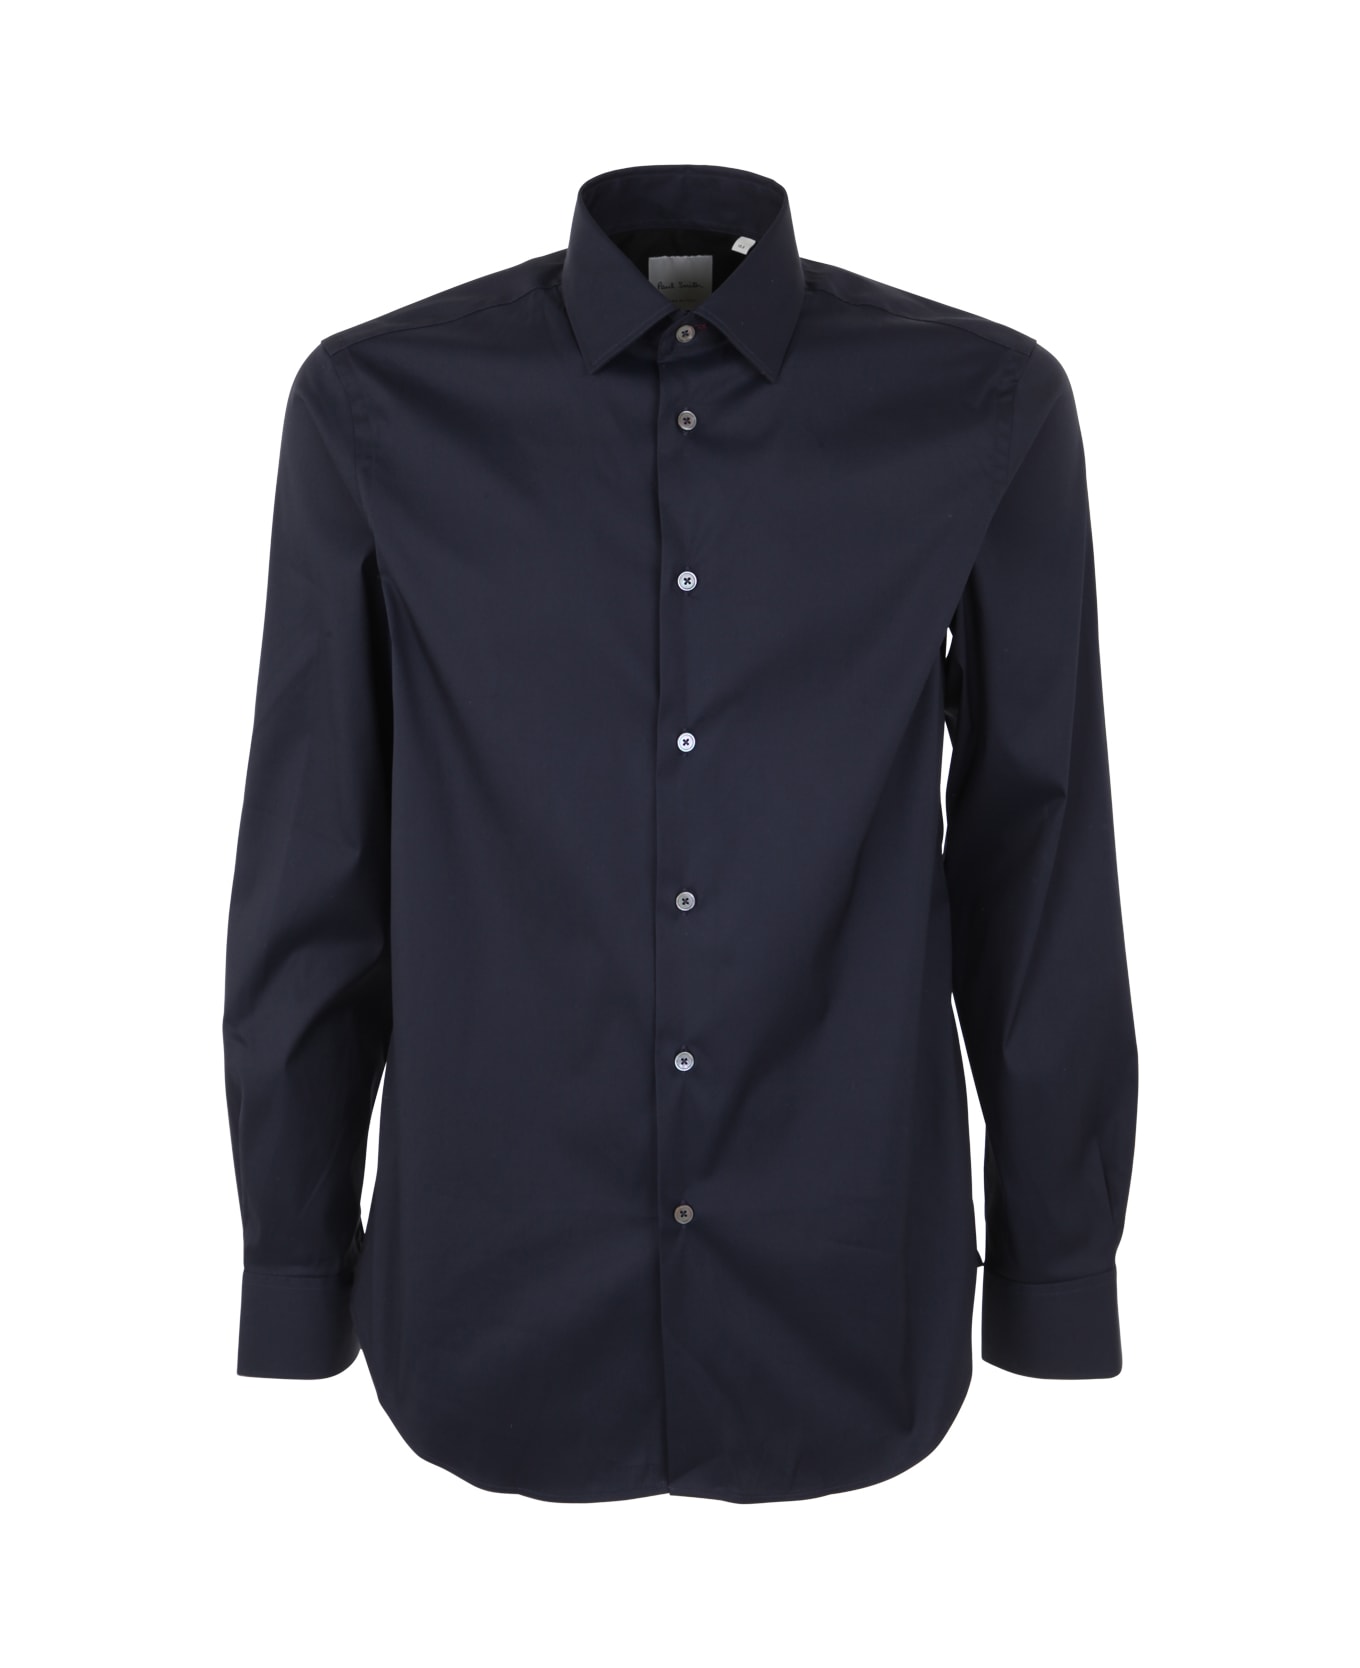 Paul Smith Mens Tailored Fit Shirt - Dk Na シャツ